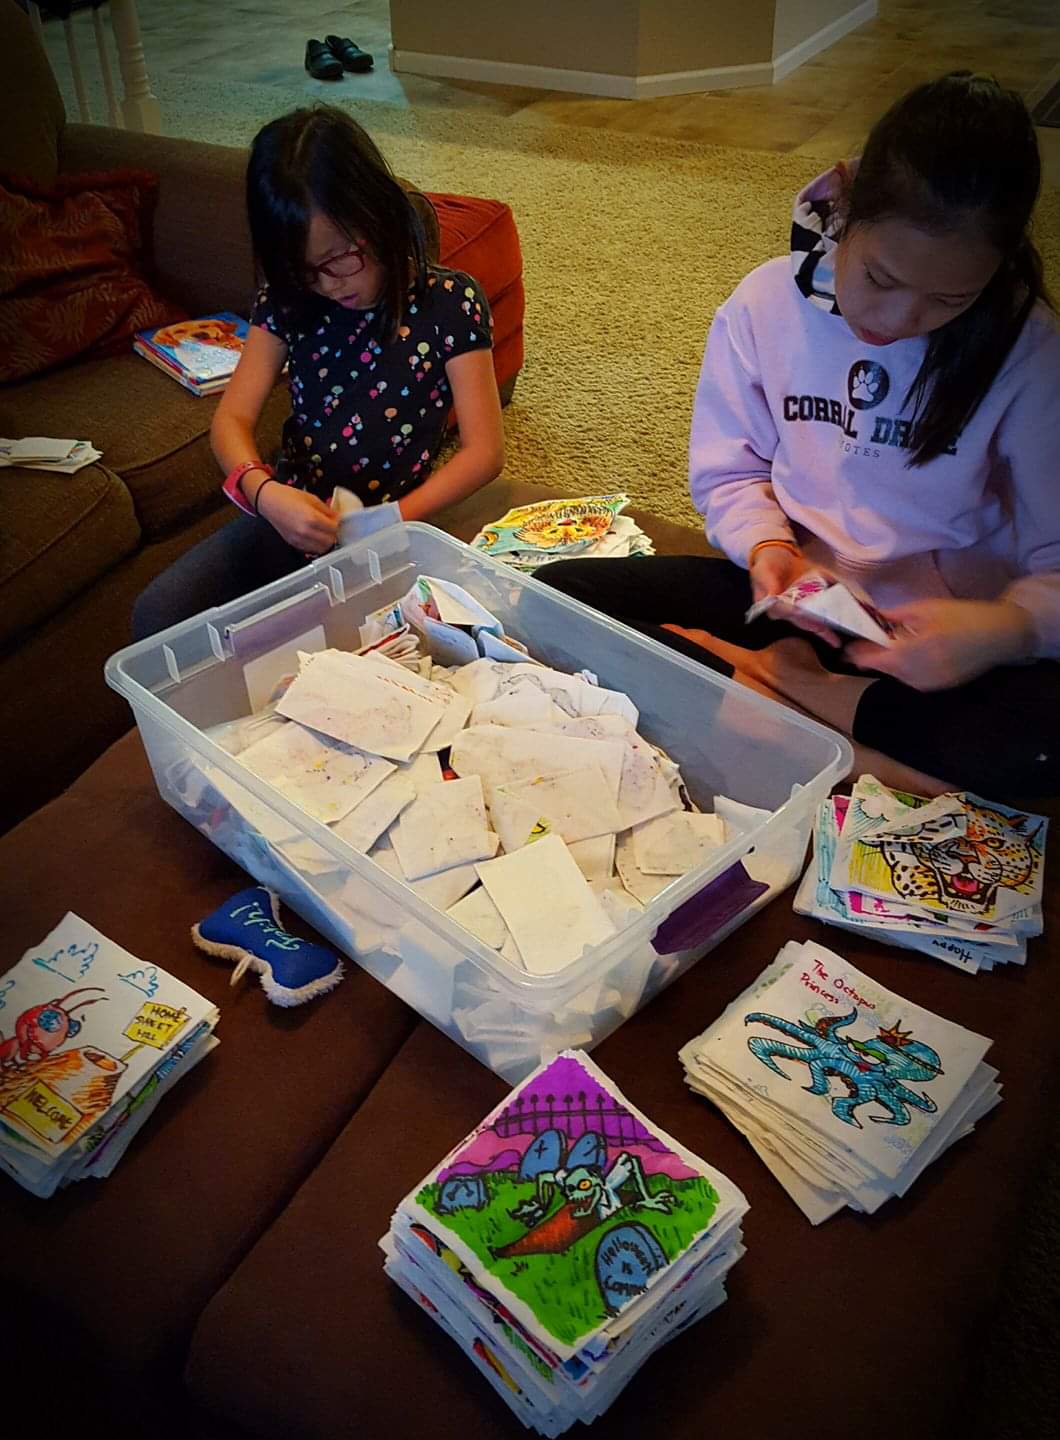 Math professor Travis Kolwaski's daughters Maia, 9, and Liliana, 13, look through the hundreds of napkin art creations he's drawn for them over the years.